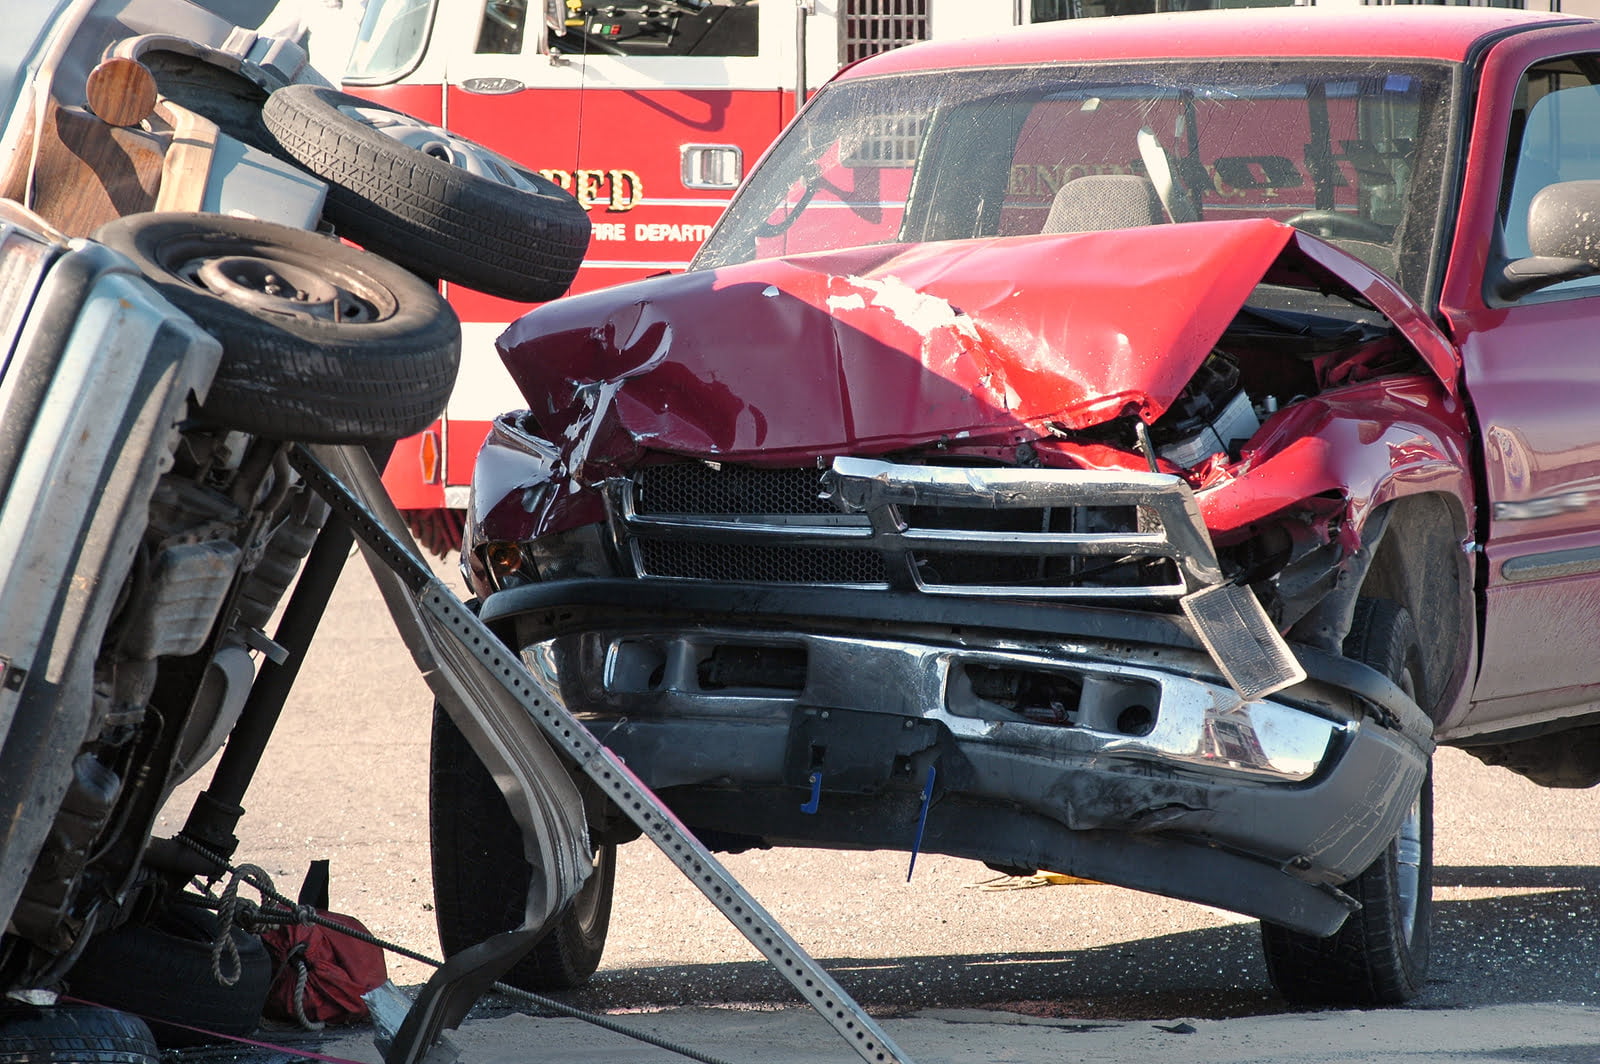 Vehicle Accident Lawyer